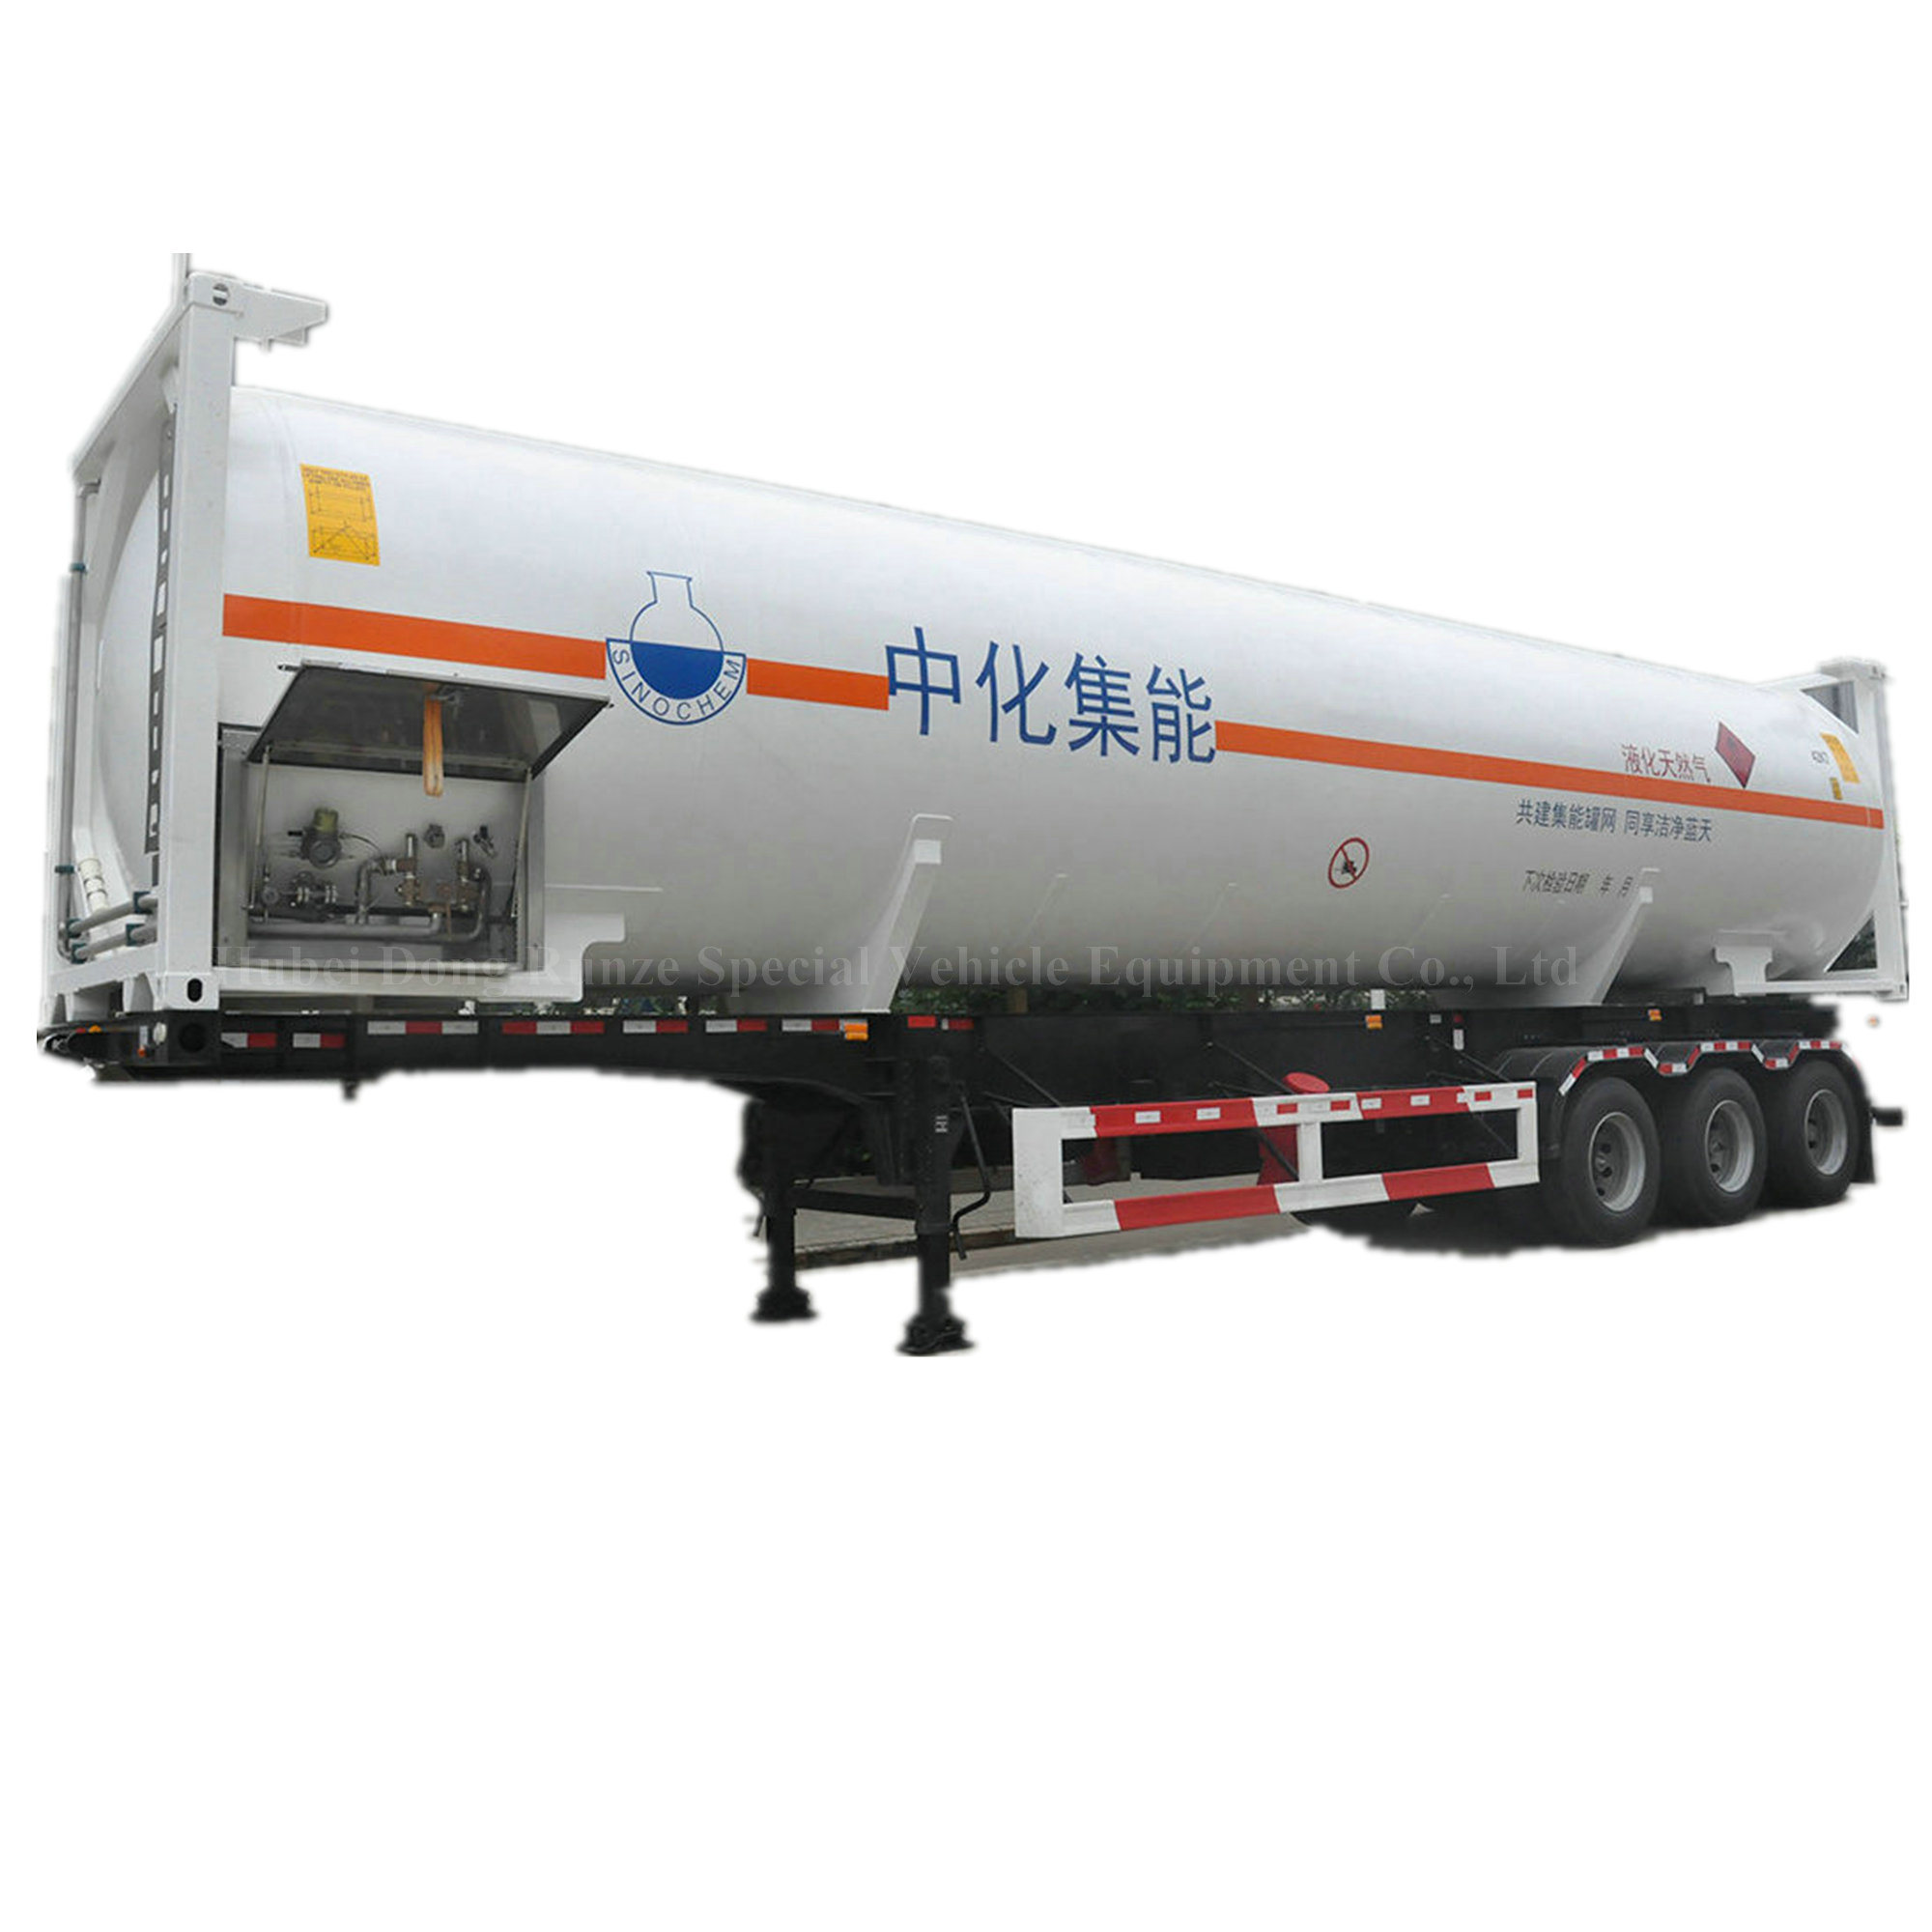 Truck Trailer Mounted T75 Cryogenic Liquid Gas Tank 45.5m3 for Natural Gas Transport